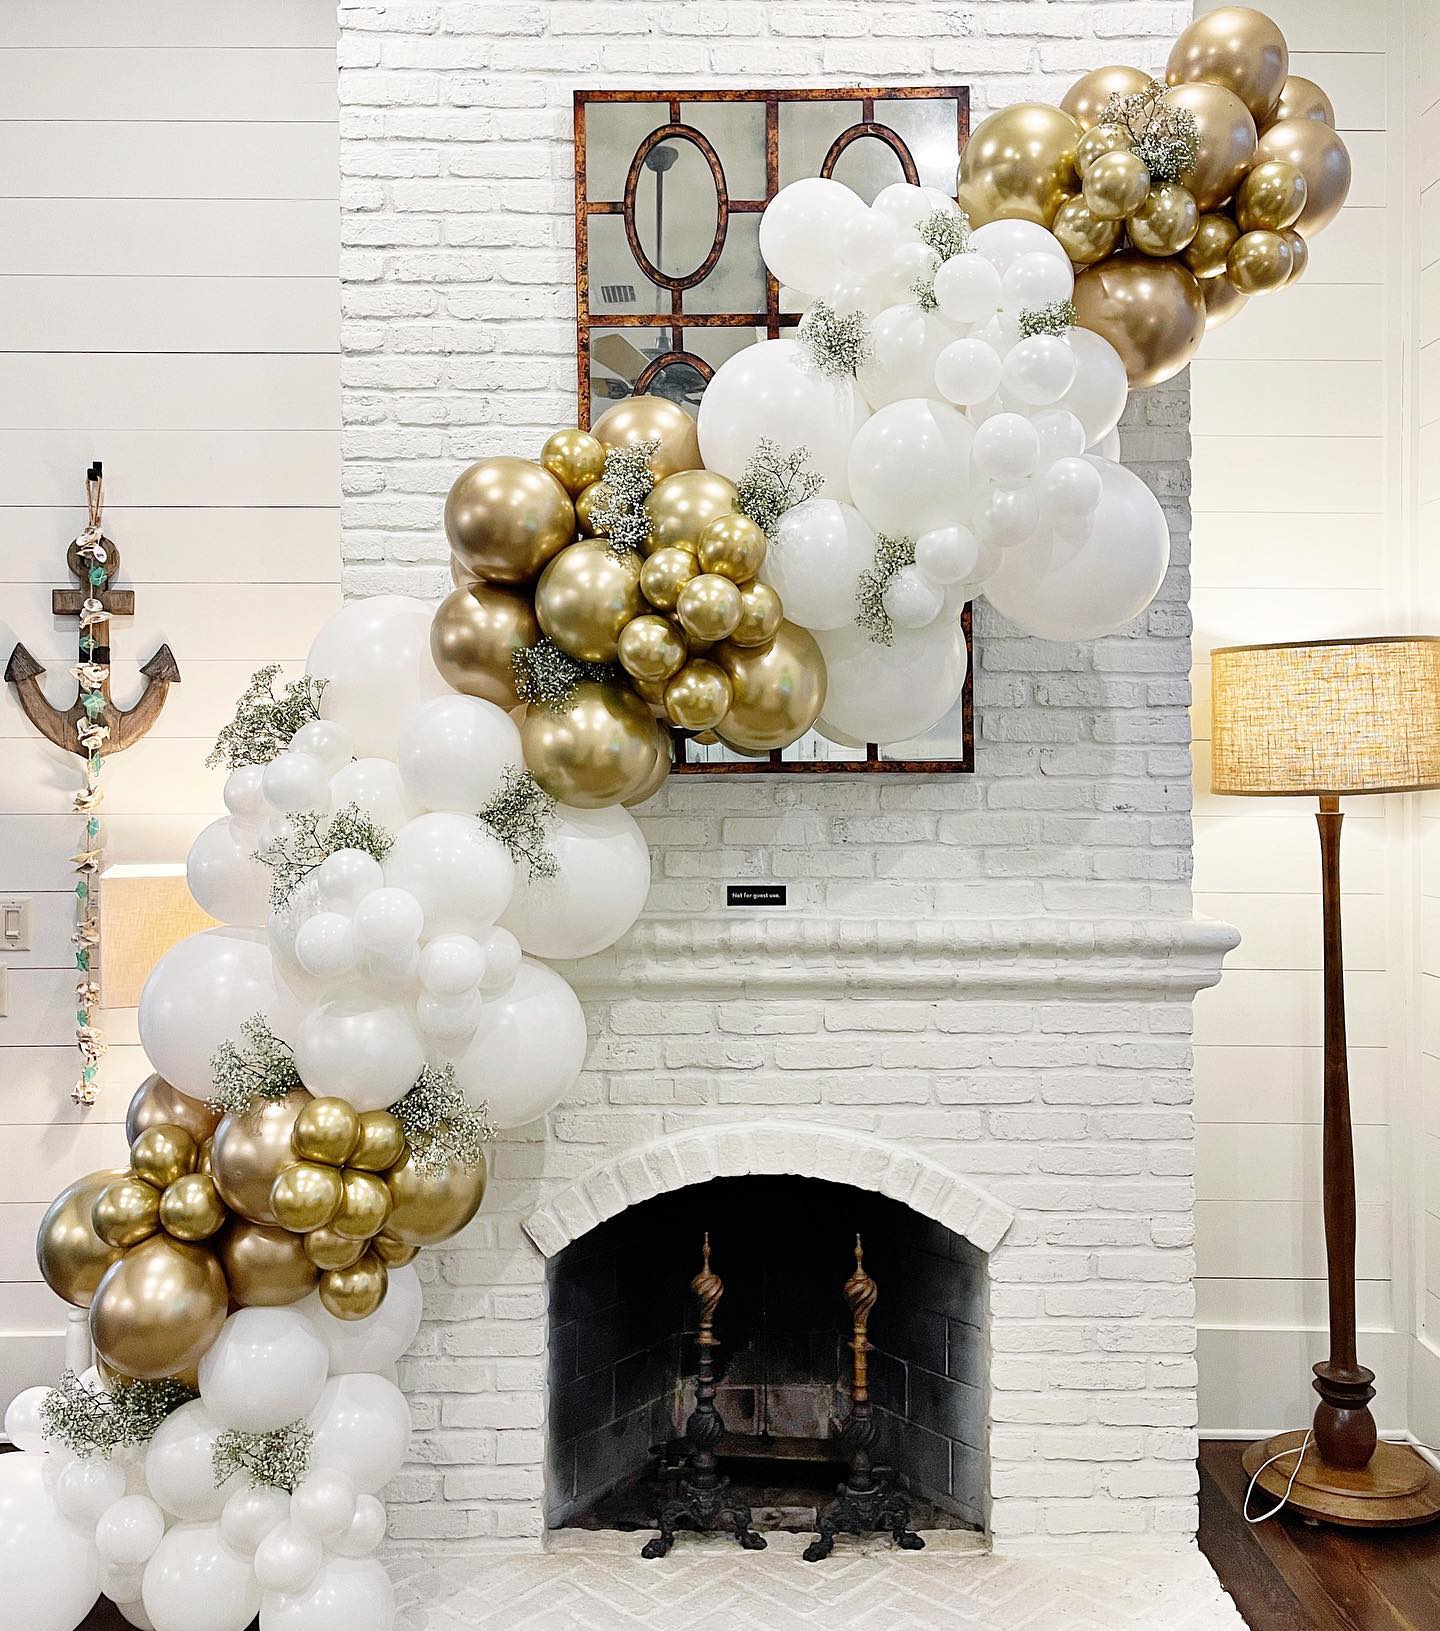 The perfect backdrop for your bridal brunch and “getting ready” bridal team photos! 

#weddingballoons #organicballoons #balloongarland #balloondecor #bridetobe #bridalbrunch #balloonstylist #30awedding #watercolorfl #30aballoons #balloons #eventstylist #partystylist